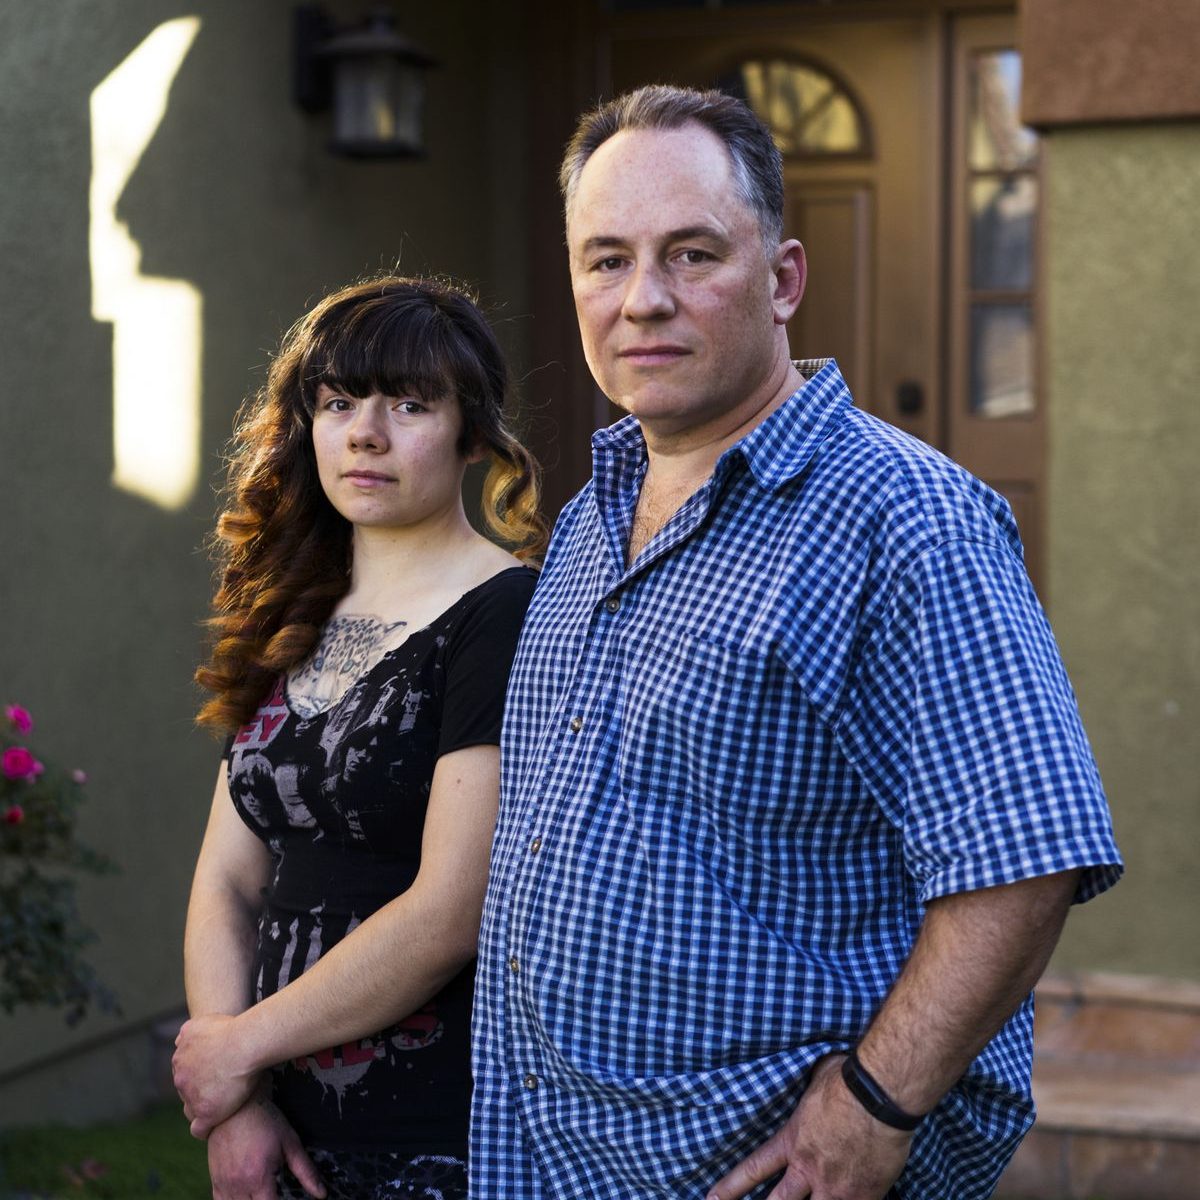 A lost decade and $200,000: one dad’s crusade to save his daughters from addiction